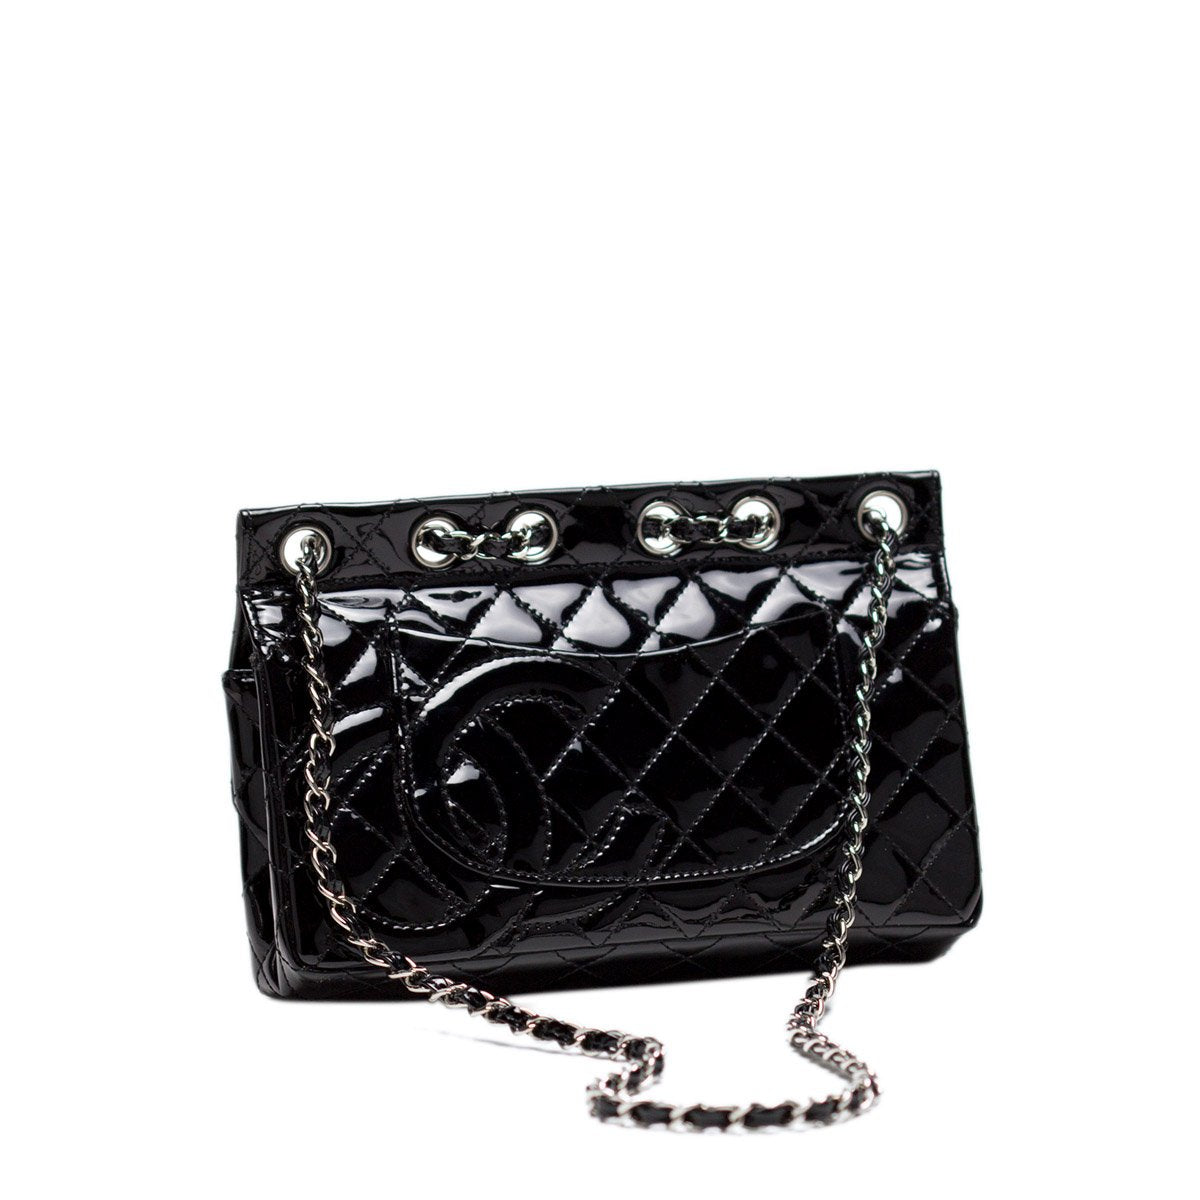 Chanel Classic Flap Supermodel Flat Top Super Rare Quilted Black Patent Leather Crossbody Bag